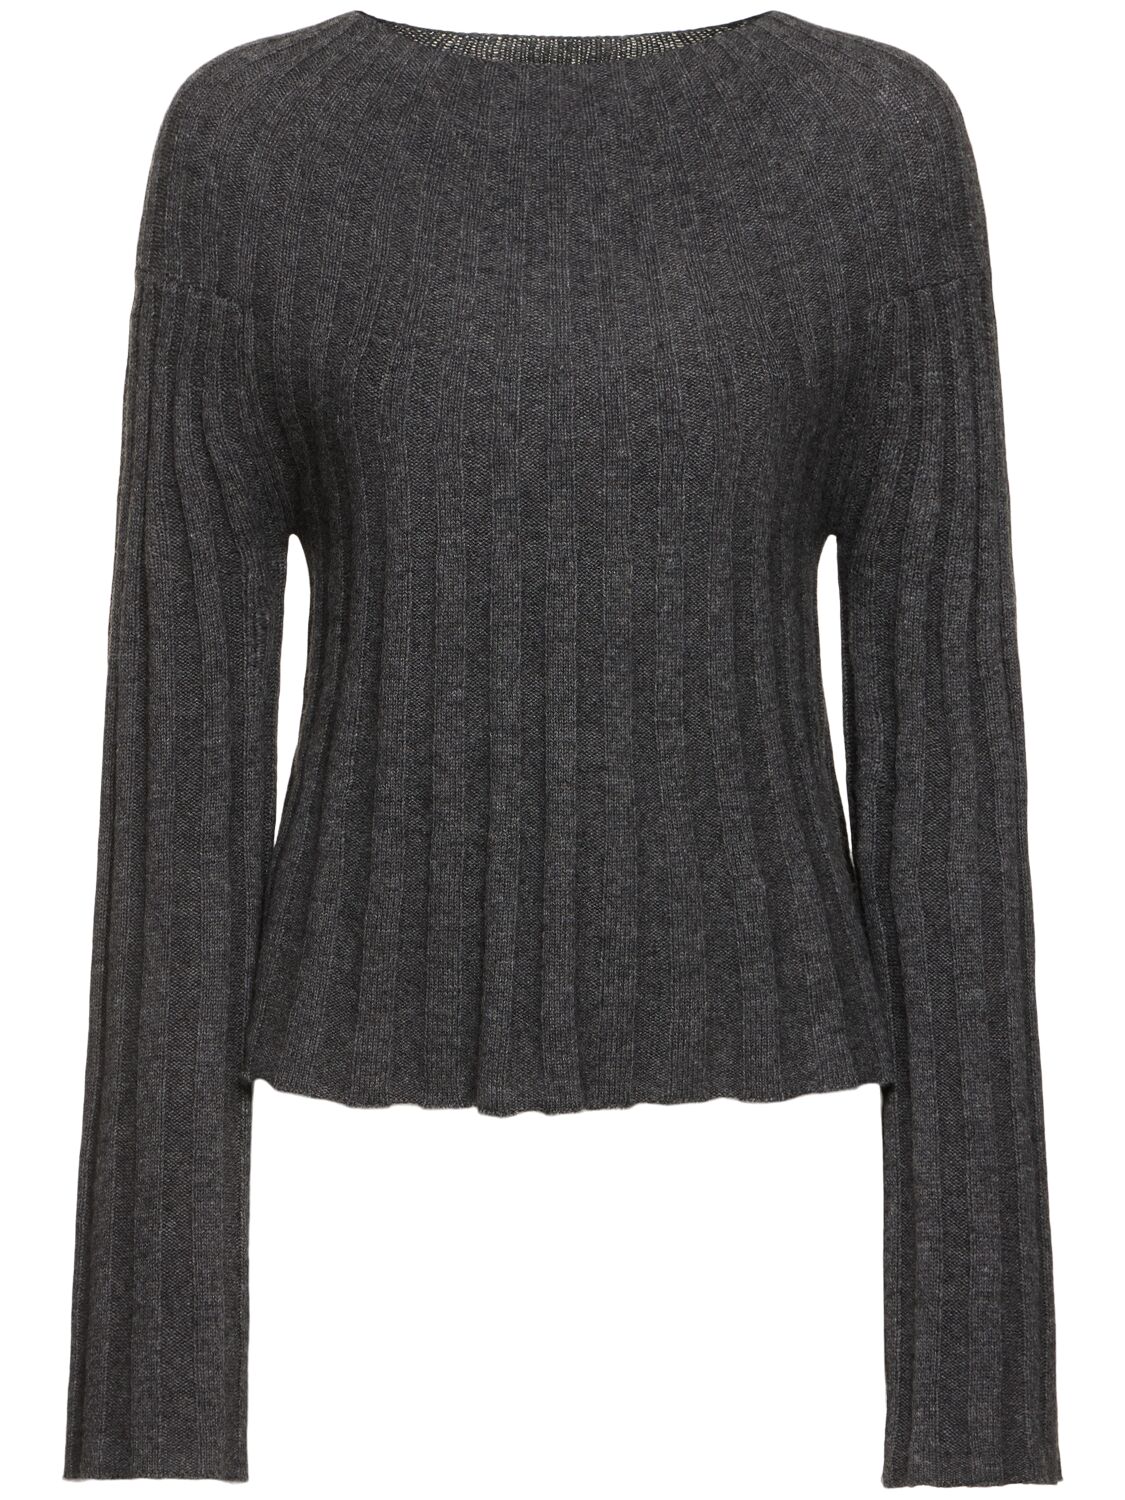 Loulou Studio Koro Ribbed Knit Wool Blend Sweater In Gray